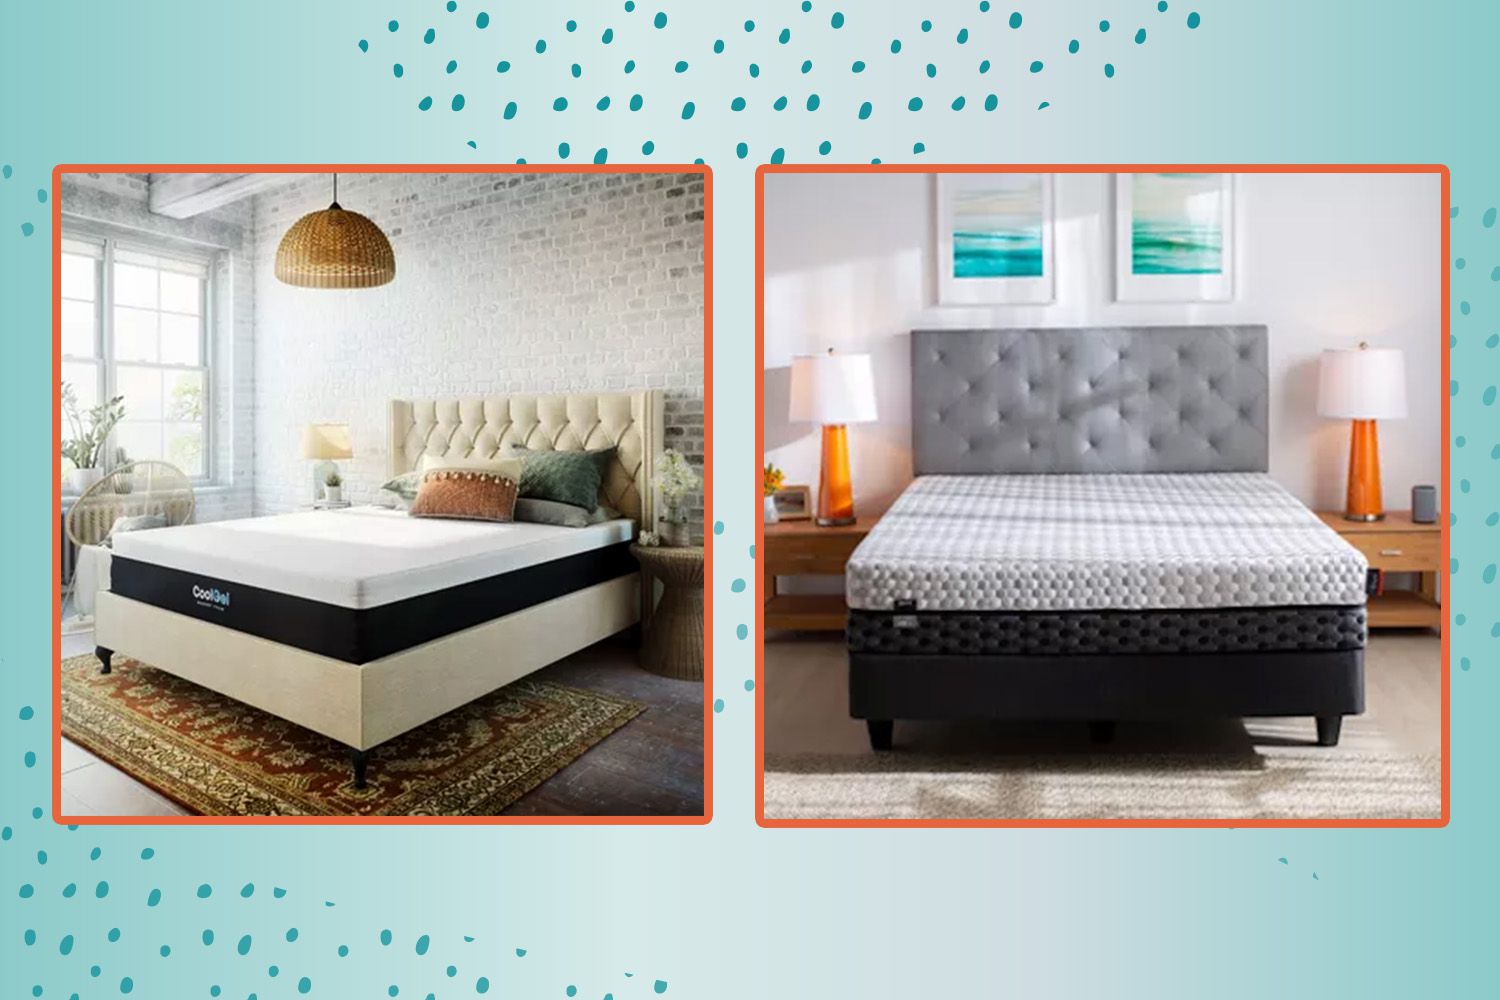 Why Buy A Cooling Mattress Singapore?